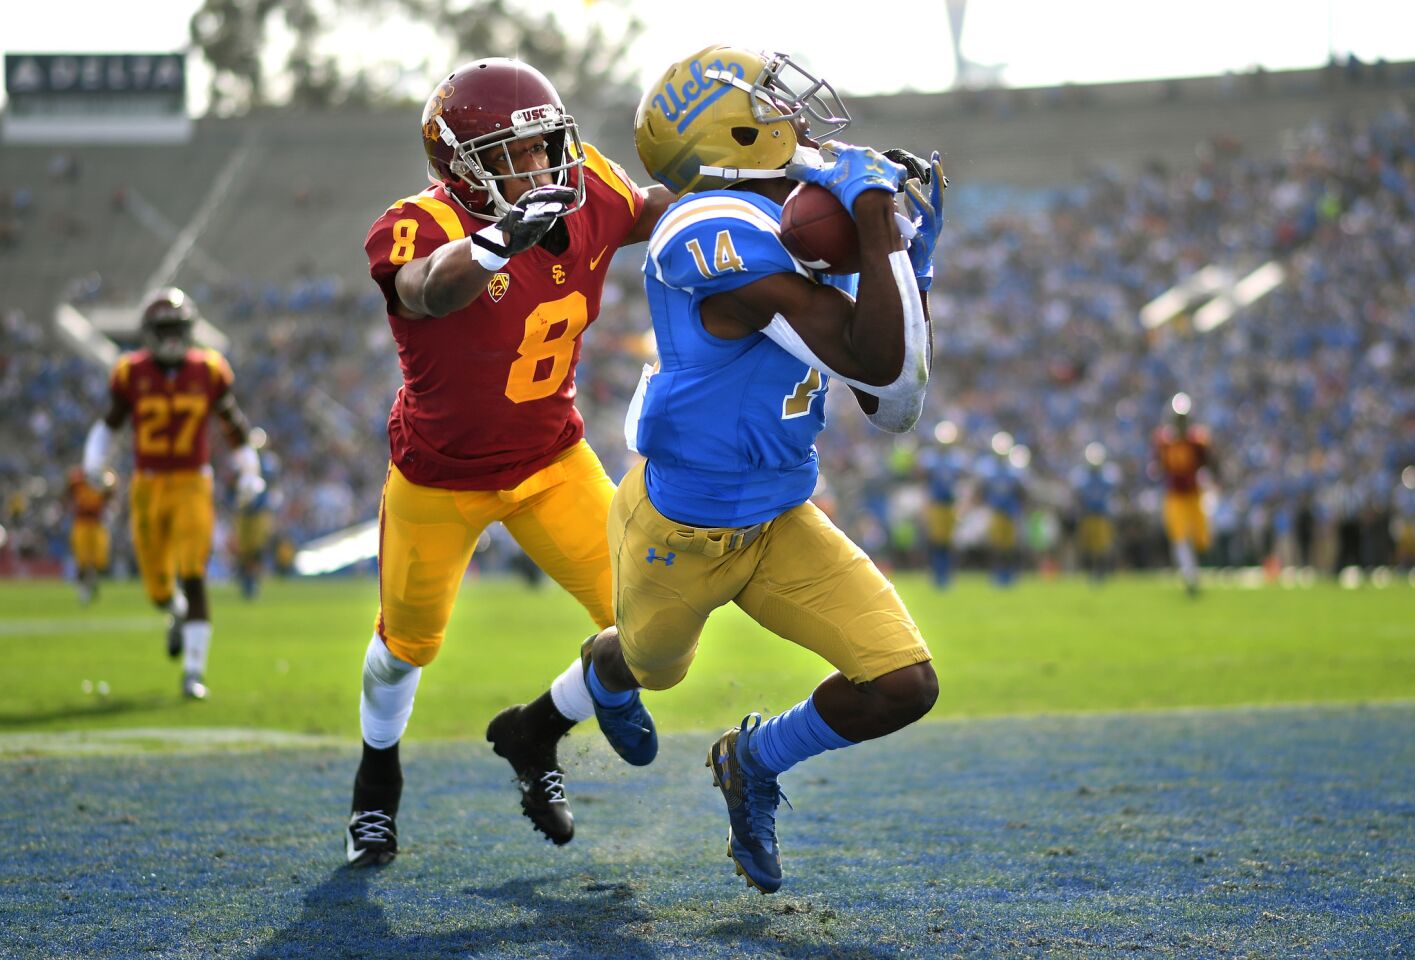 UCLA receiver Theo Howard catches a touchdown pass in front of USC defensive back Iman Marshall during the first quarter Saturday at the Rose Bowl.